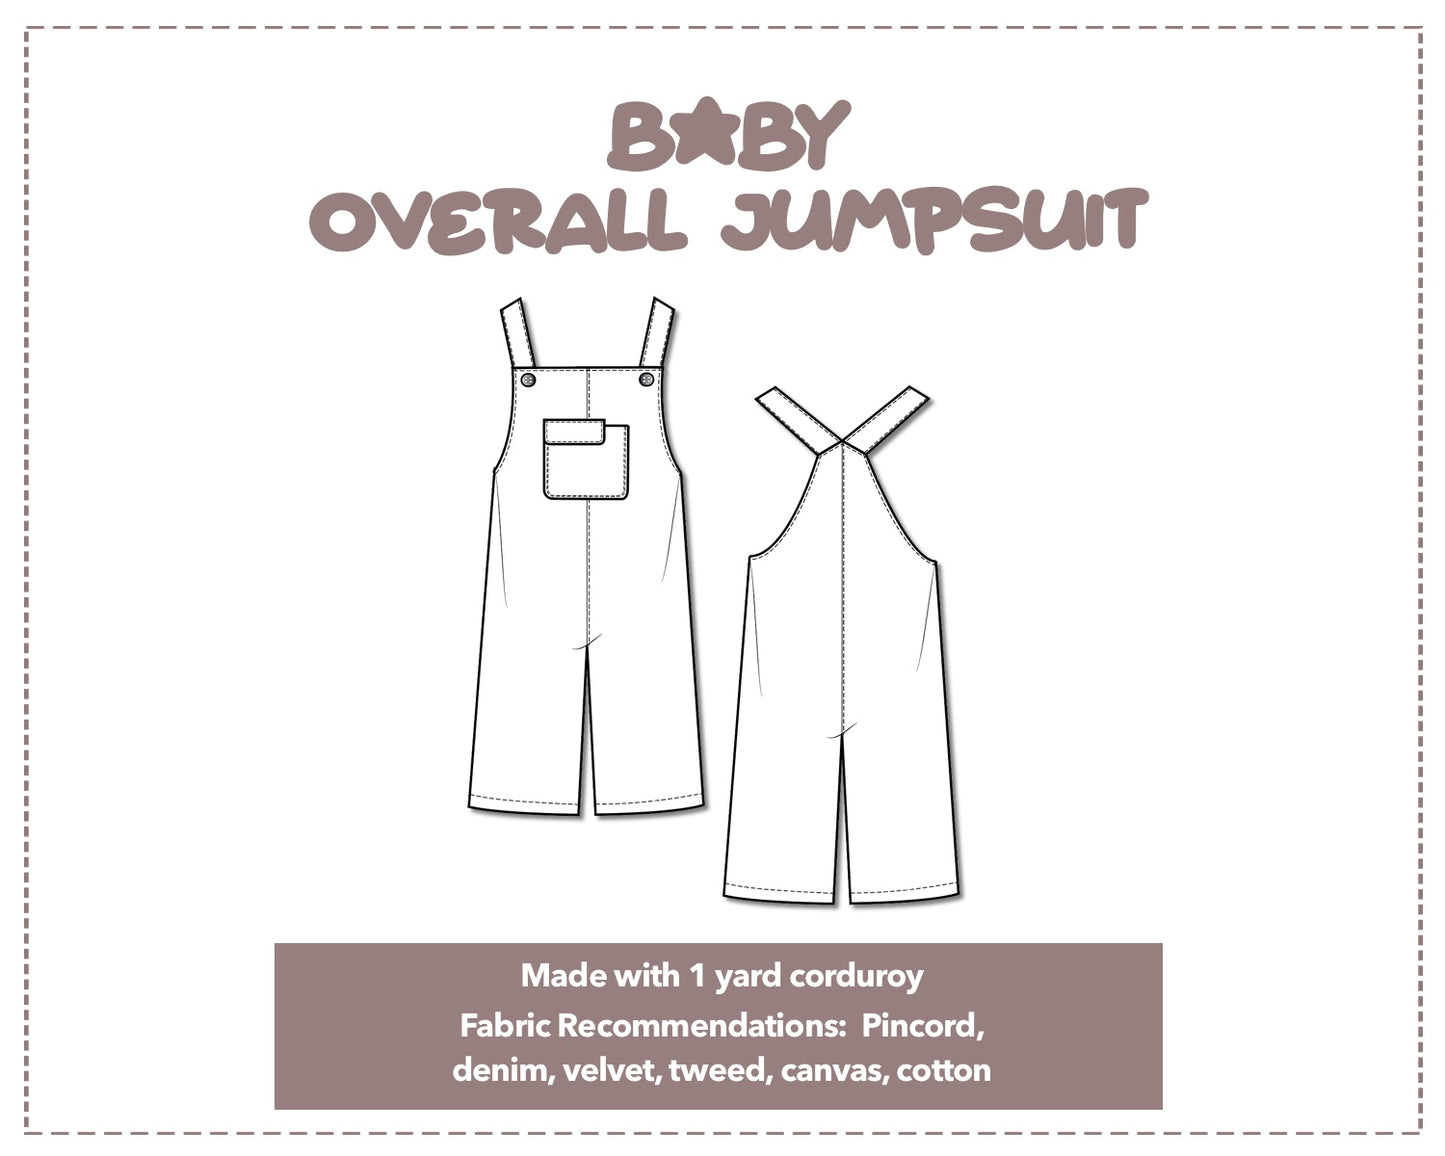 Illustration and detailed description for Baby Flap Pocket Overall Jumpsuit sewing pattern.